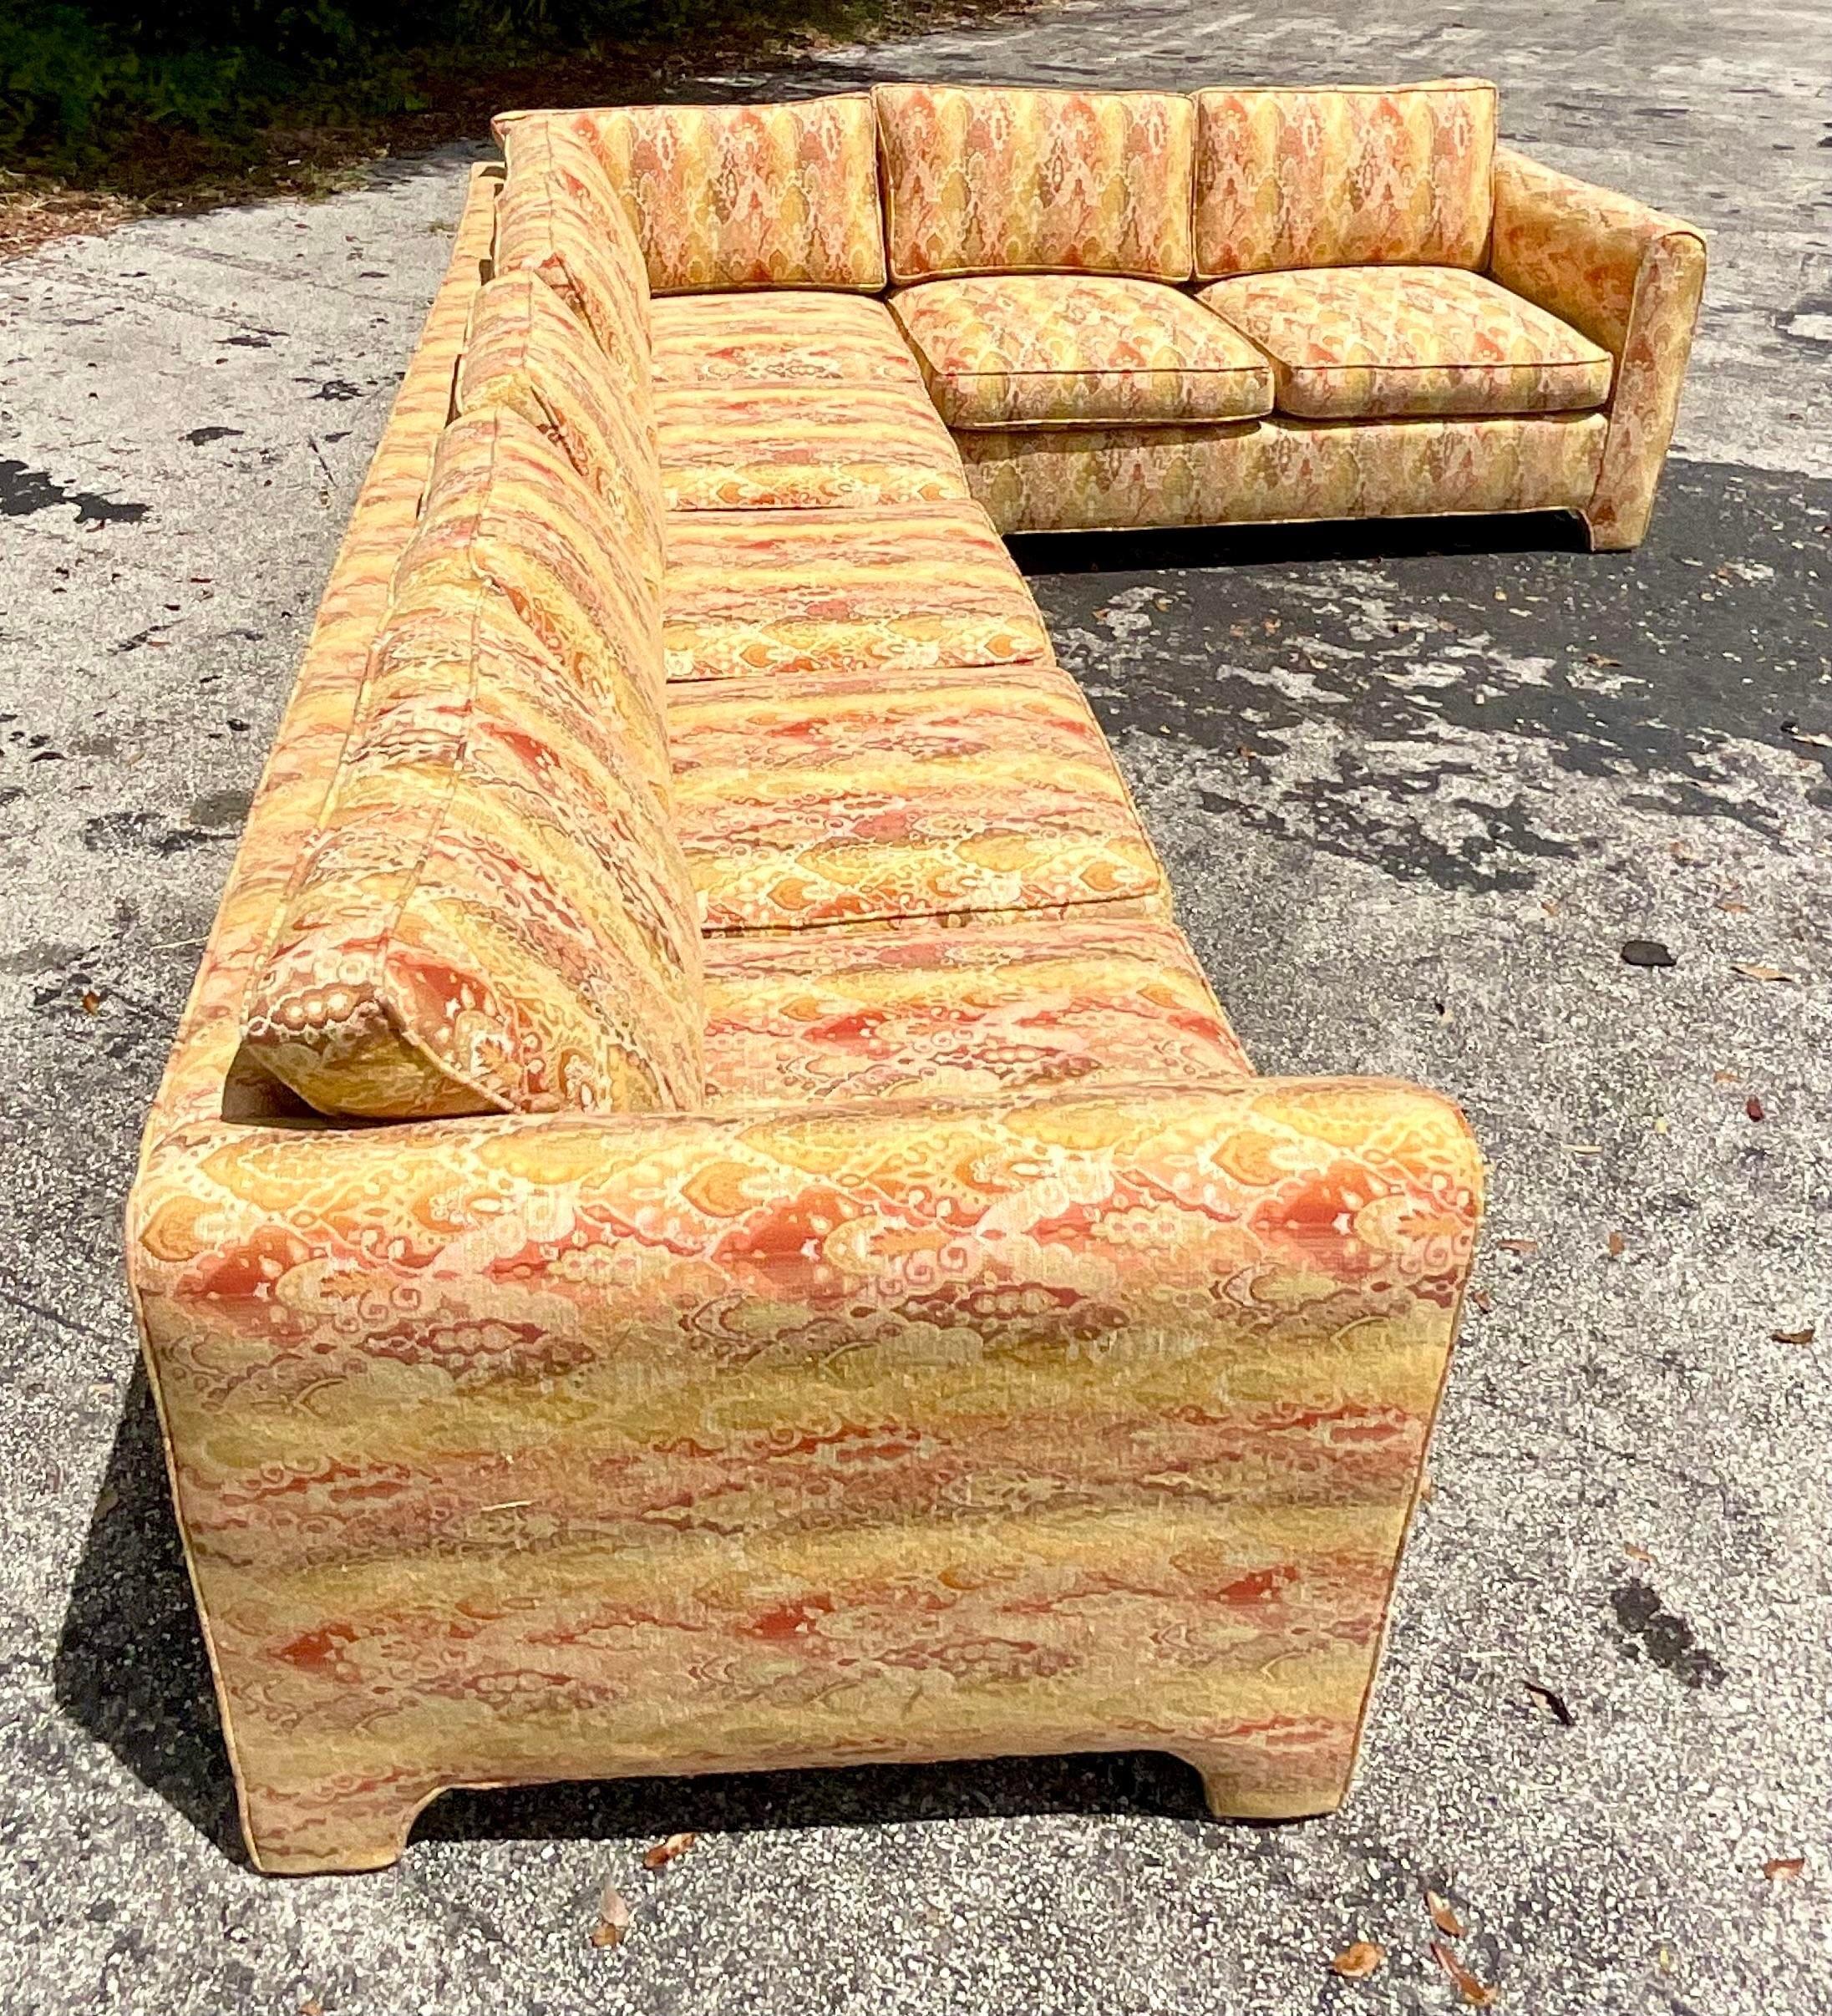 An incredible vintage Boho sectional sofa. A gorgeous woven jacquard in gorgeous rich colors. Three sections make up this great parsons style design. Acquired from a Palm Beach estate.

Long section 97.5
Corner piece 34.5x34.5
Short section 61